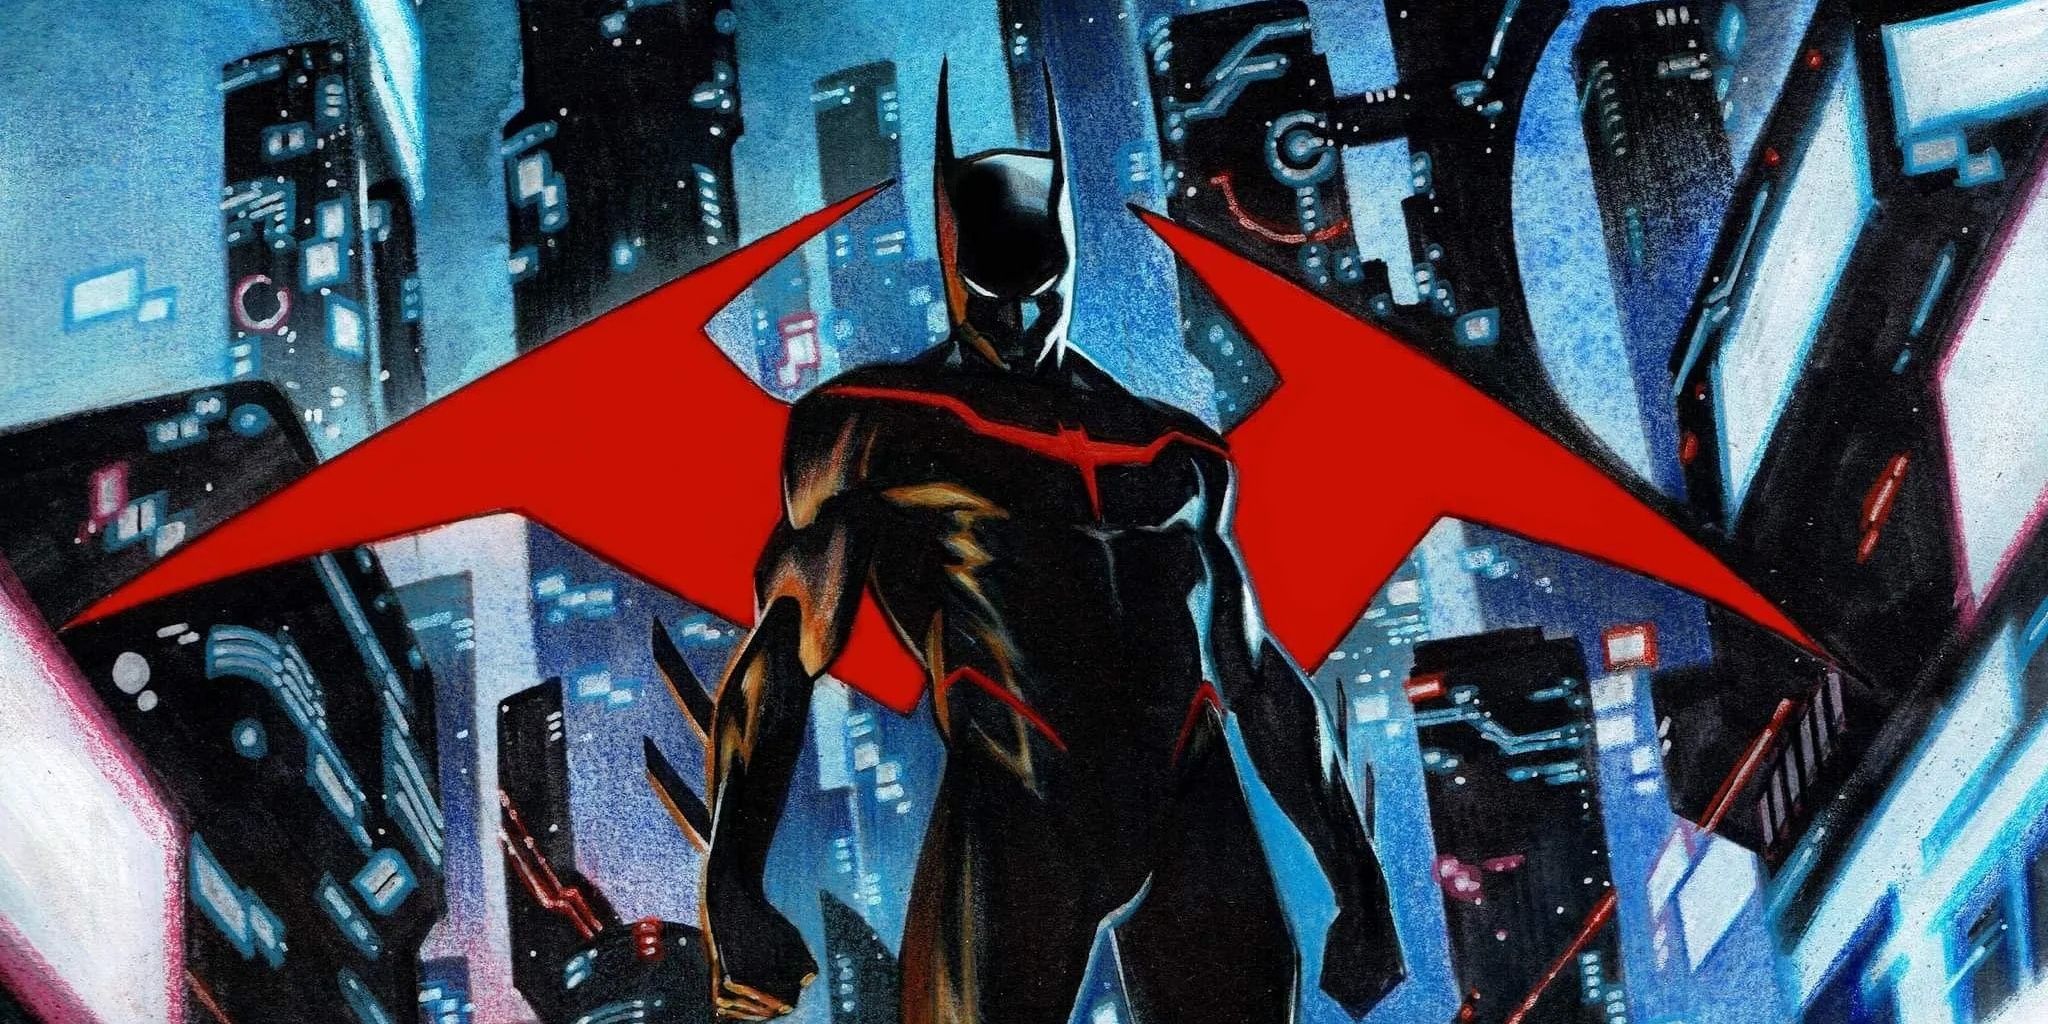 Batman Beyond Batsuit in Neo-Gothic cover in DC Comics